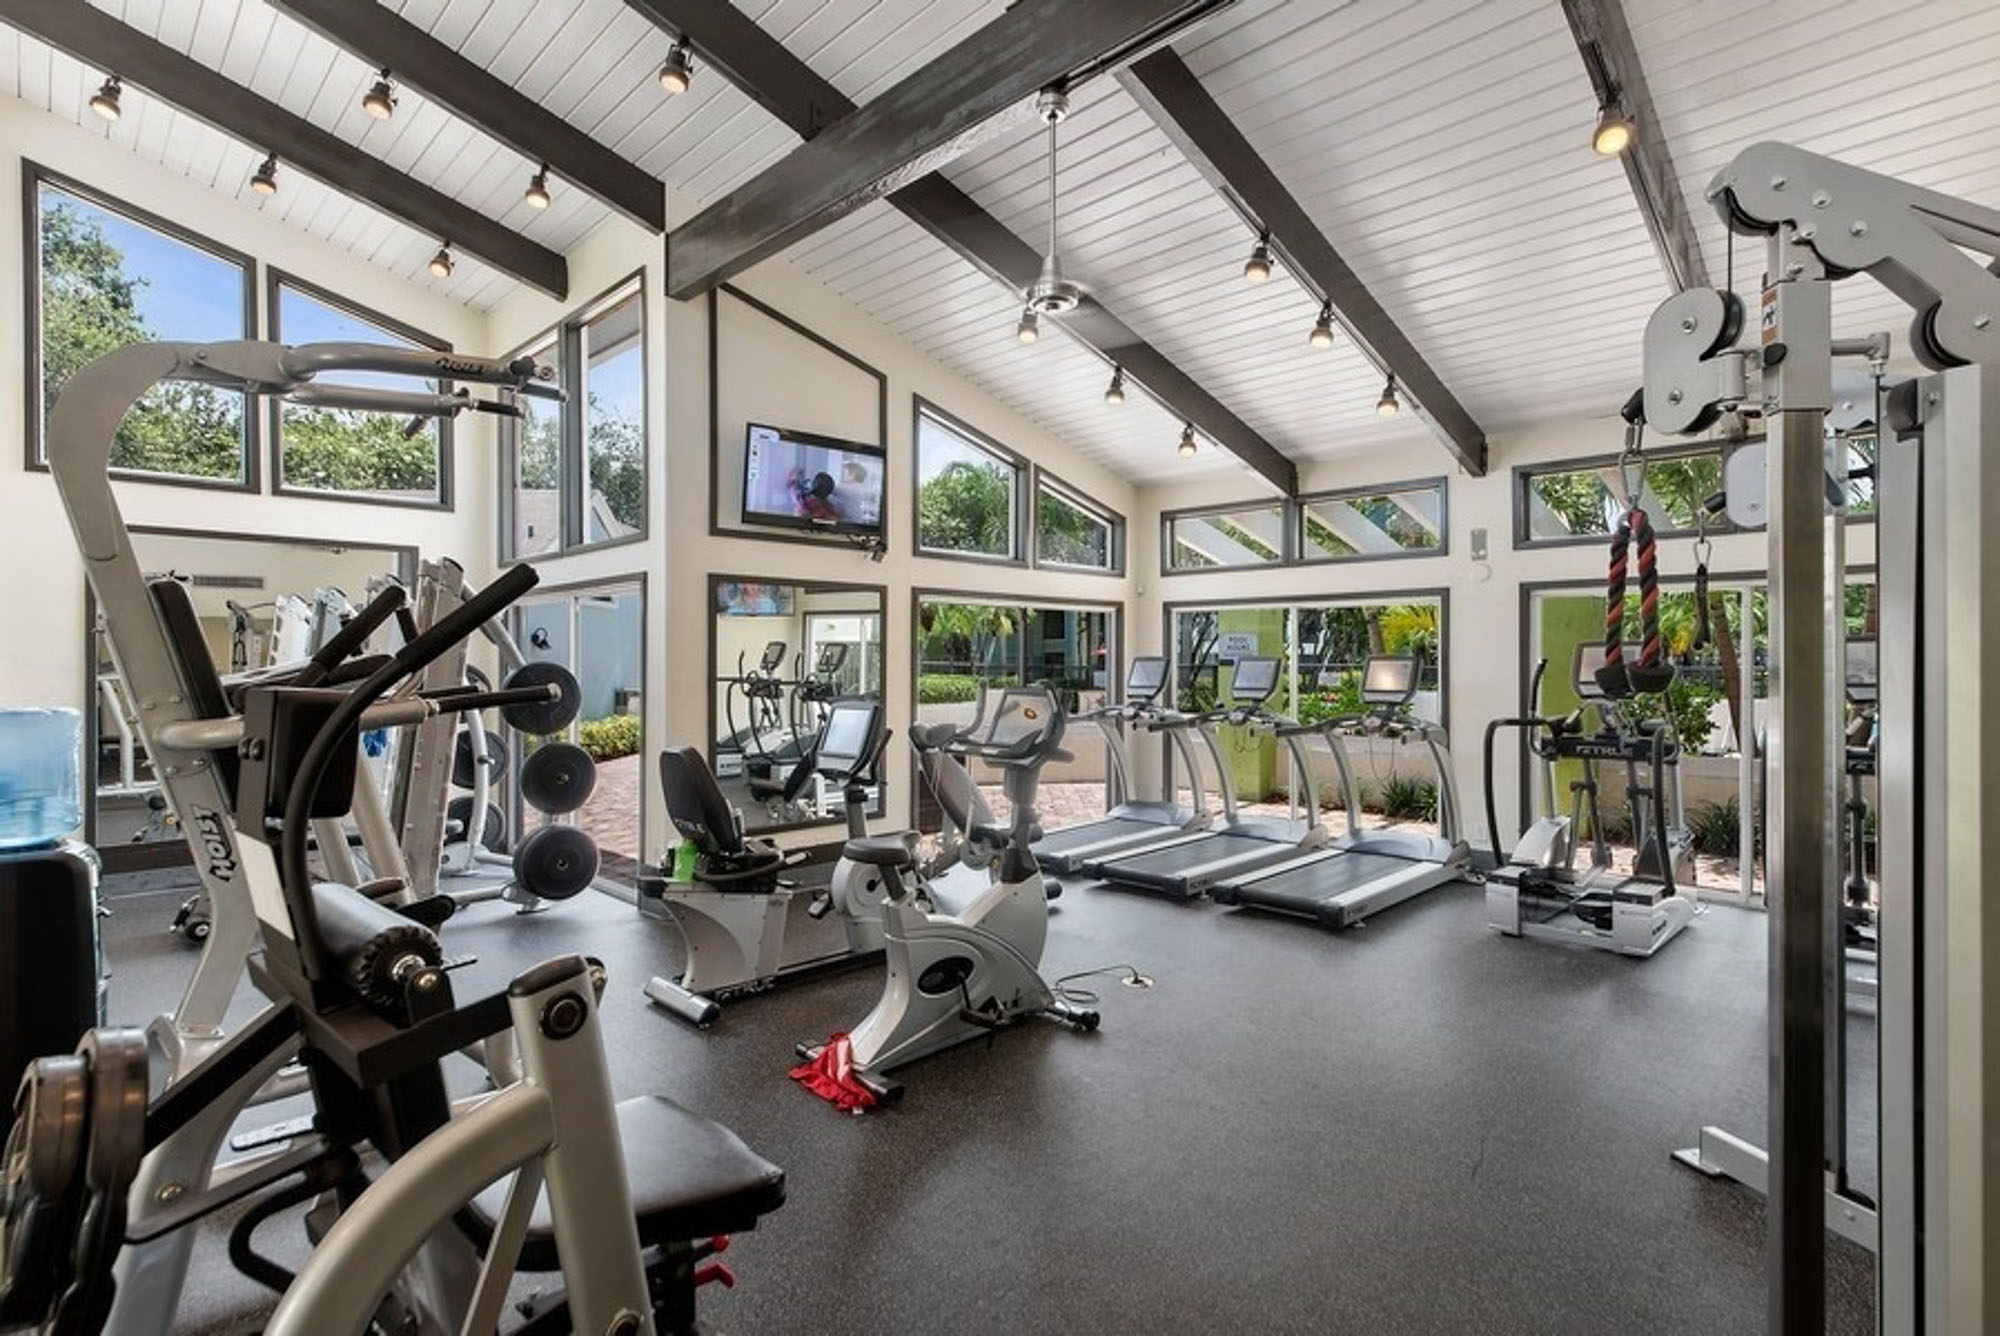 The fitness center at Turtle Cove in West Palm Beach, FL.